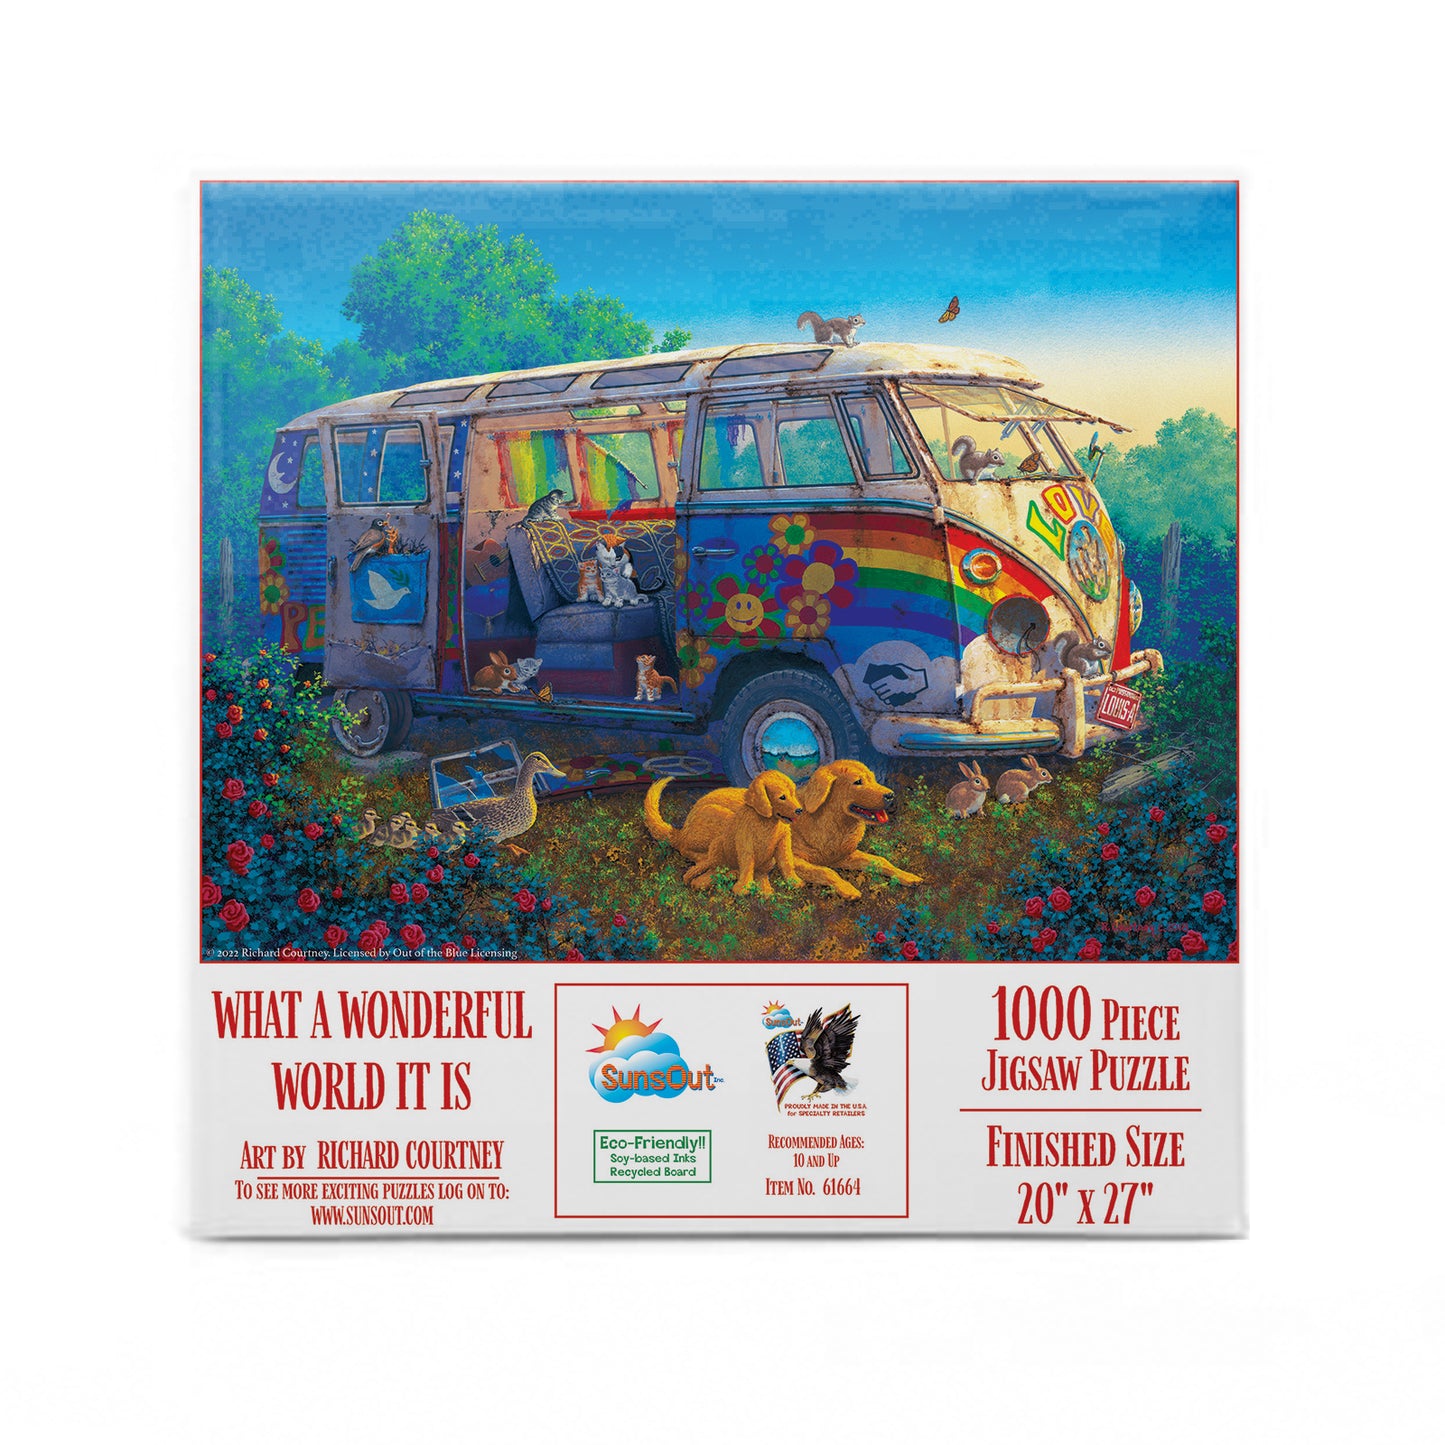 What a Wonderful World it is - 1000 Piece Jigsaw Puzzle